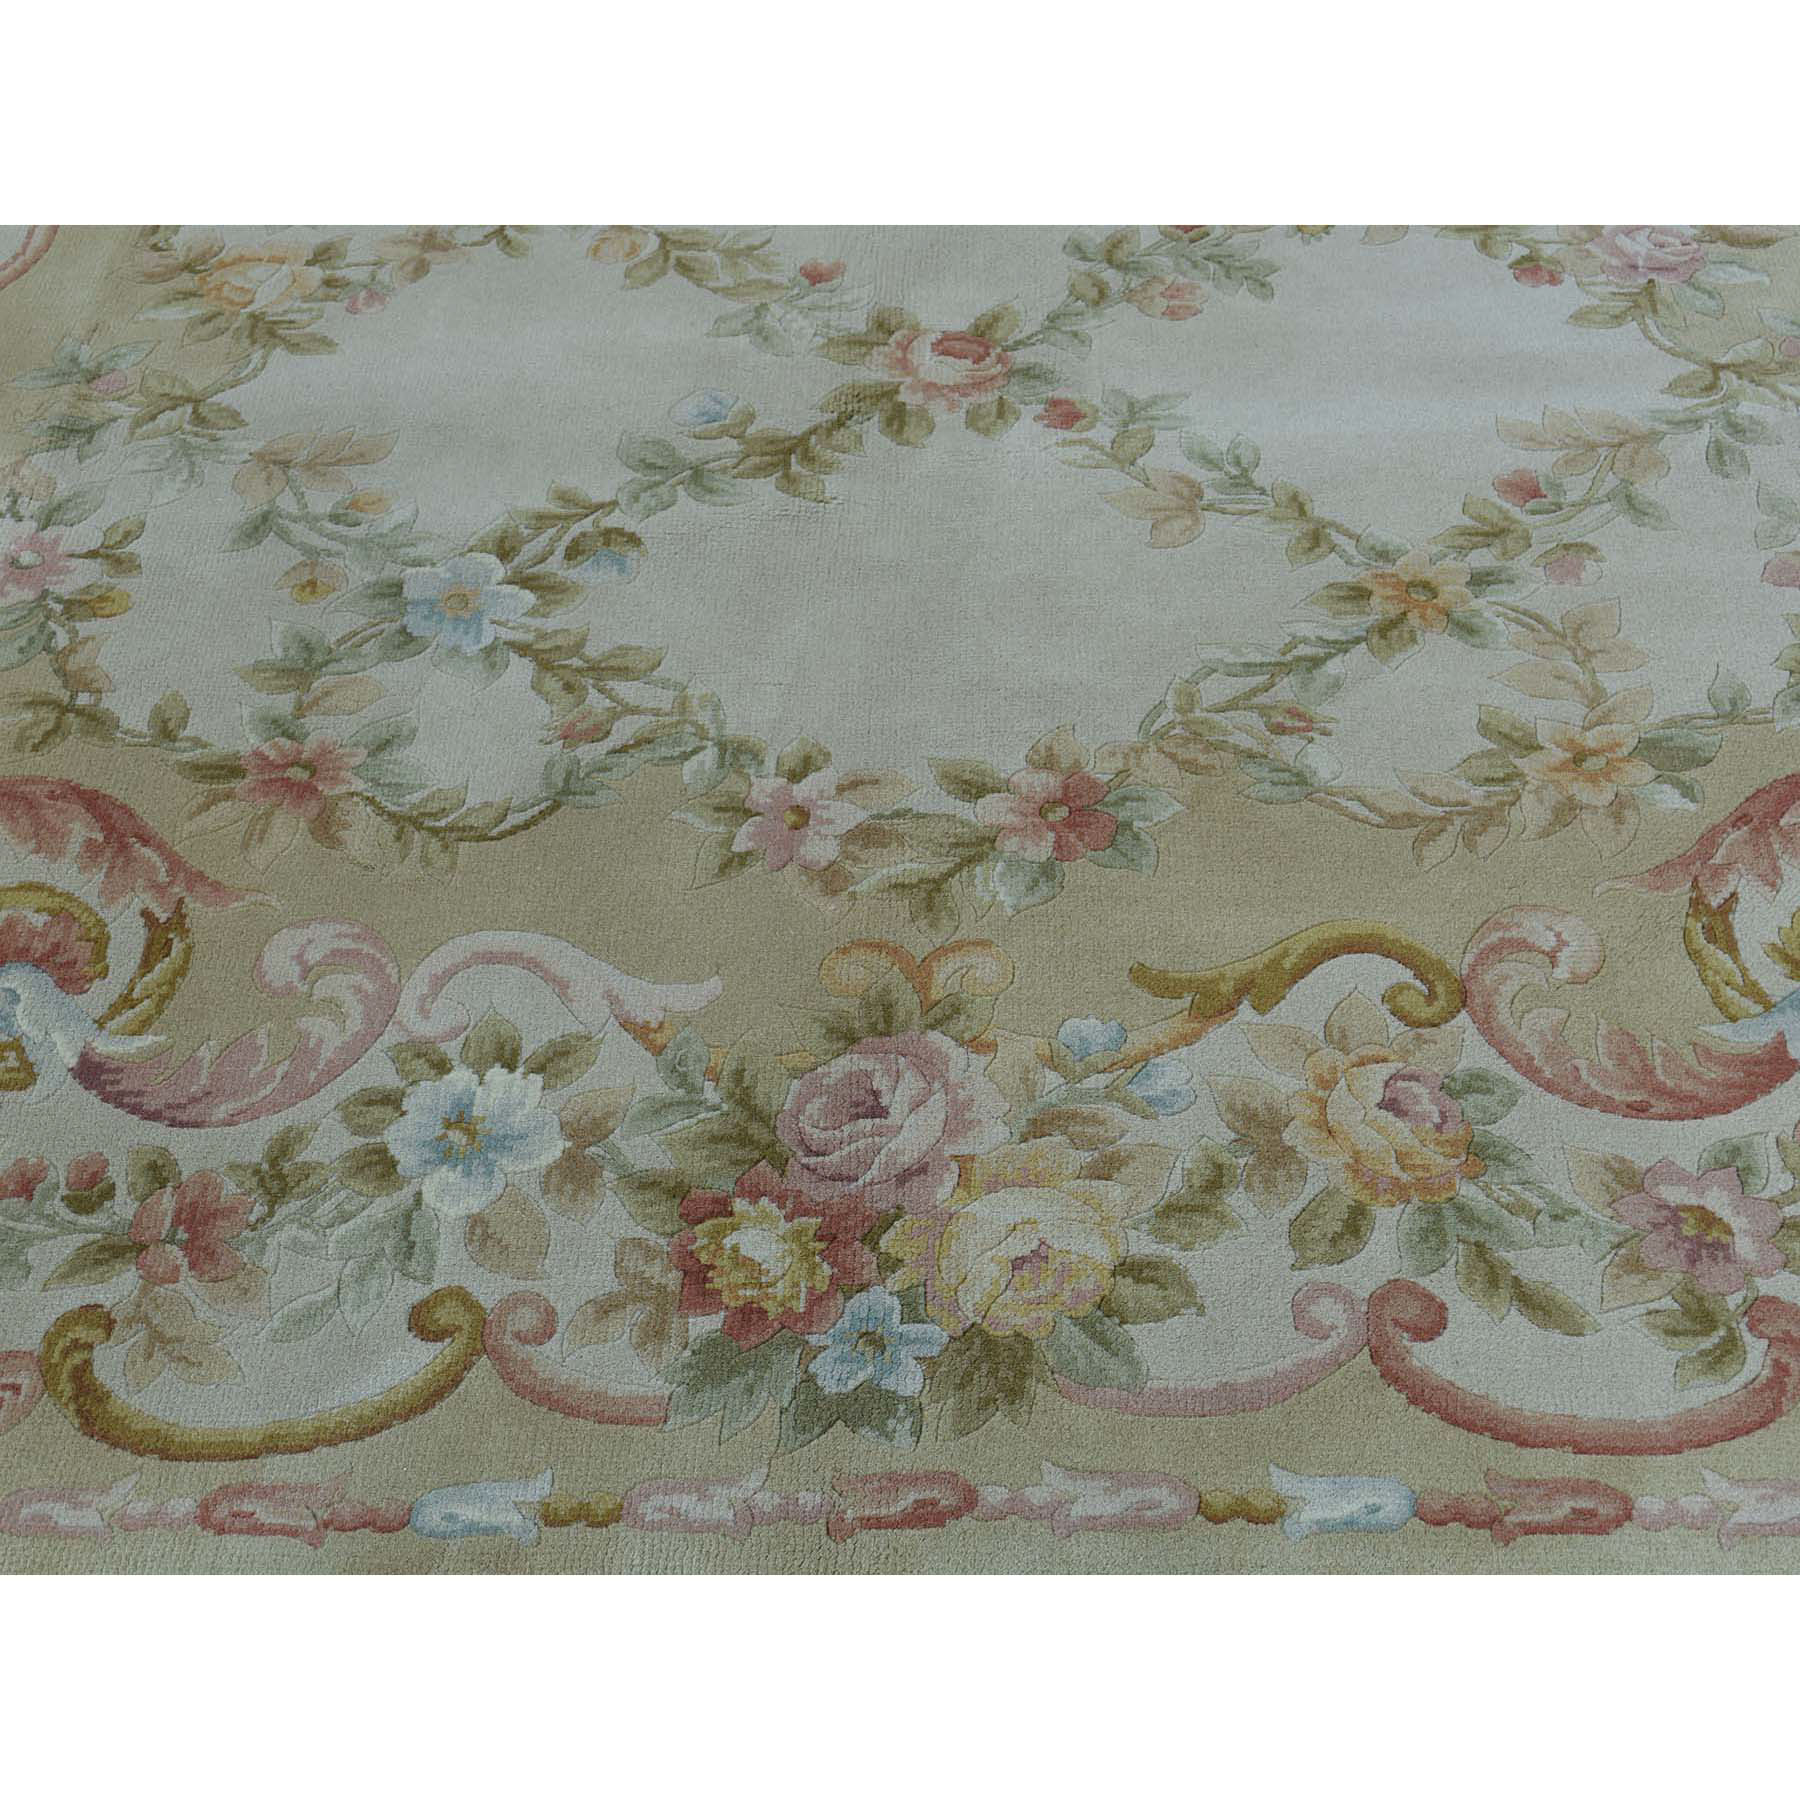 8-x10- Savonnerie Floral Trellis Design Thick And Plush Hand-Knotted Oriental Rug 